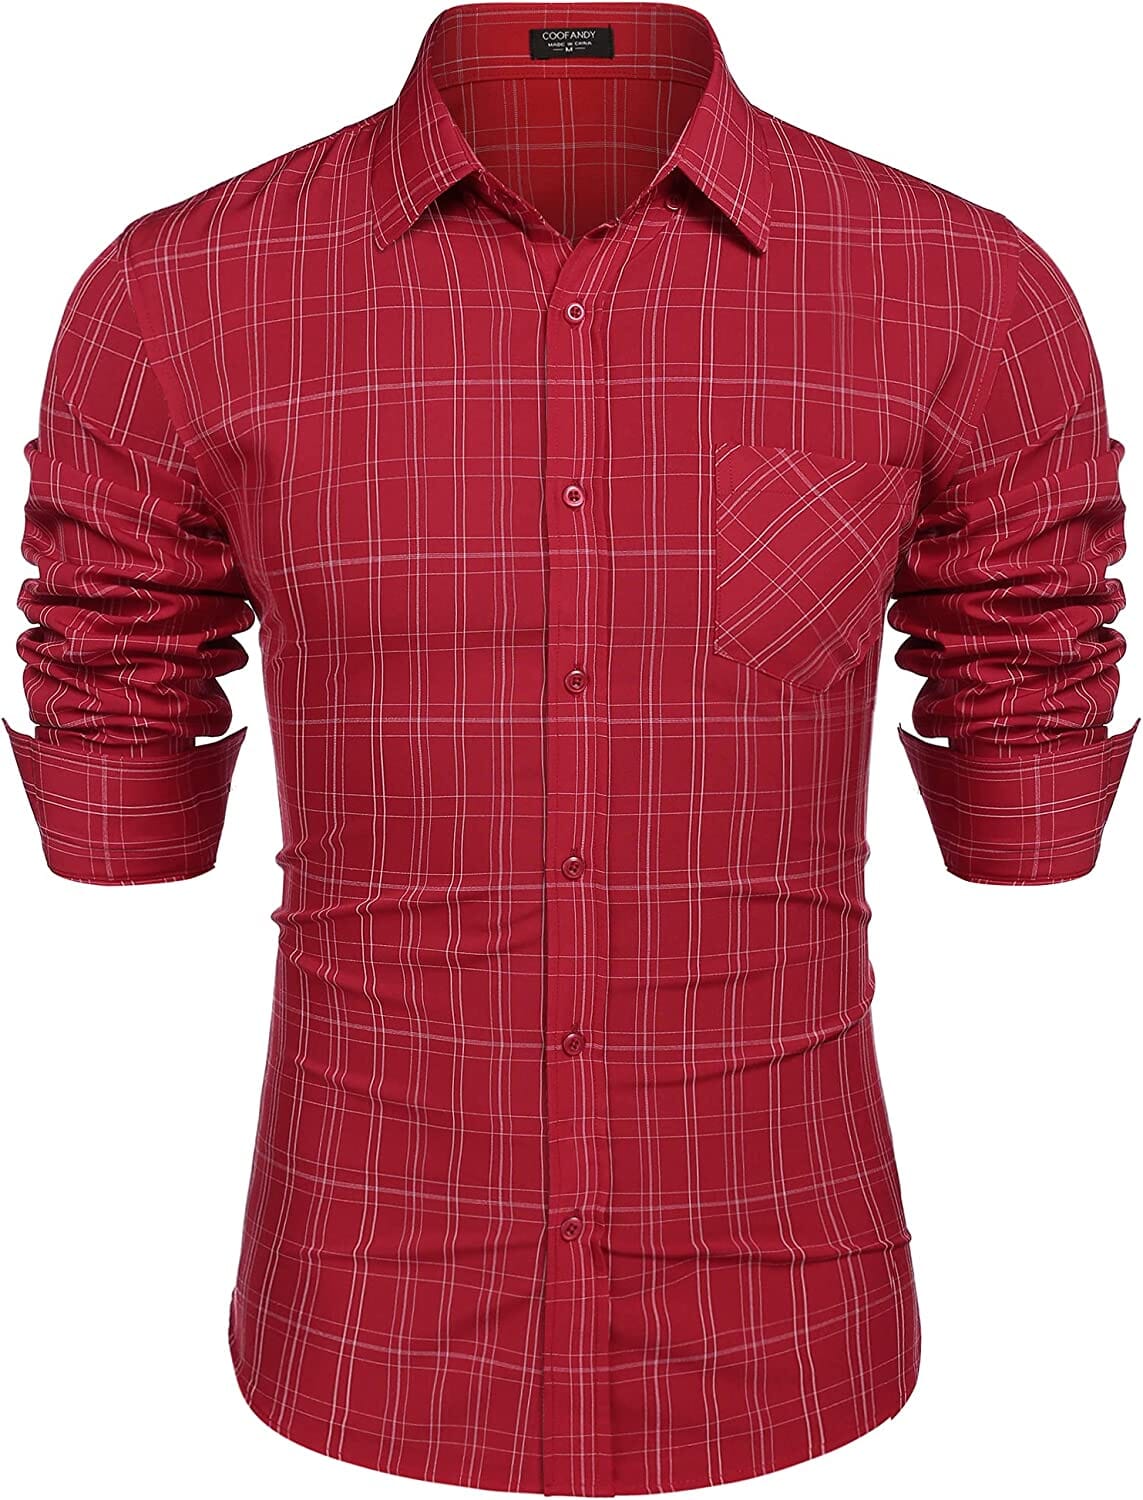 Business Button Up Plaid Shirts (US Only) Shirts Coofandy's Plaid Red S 